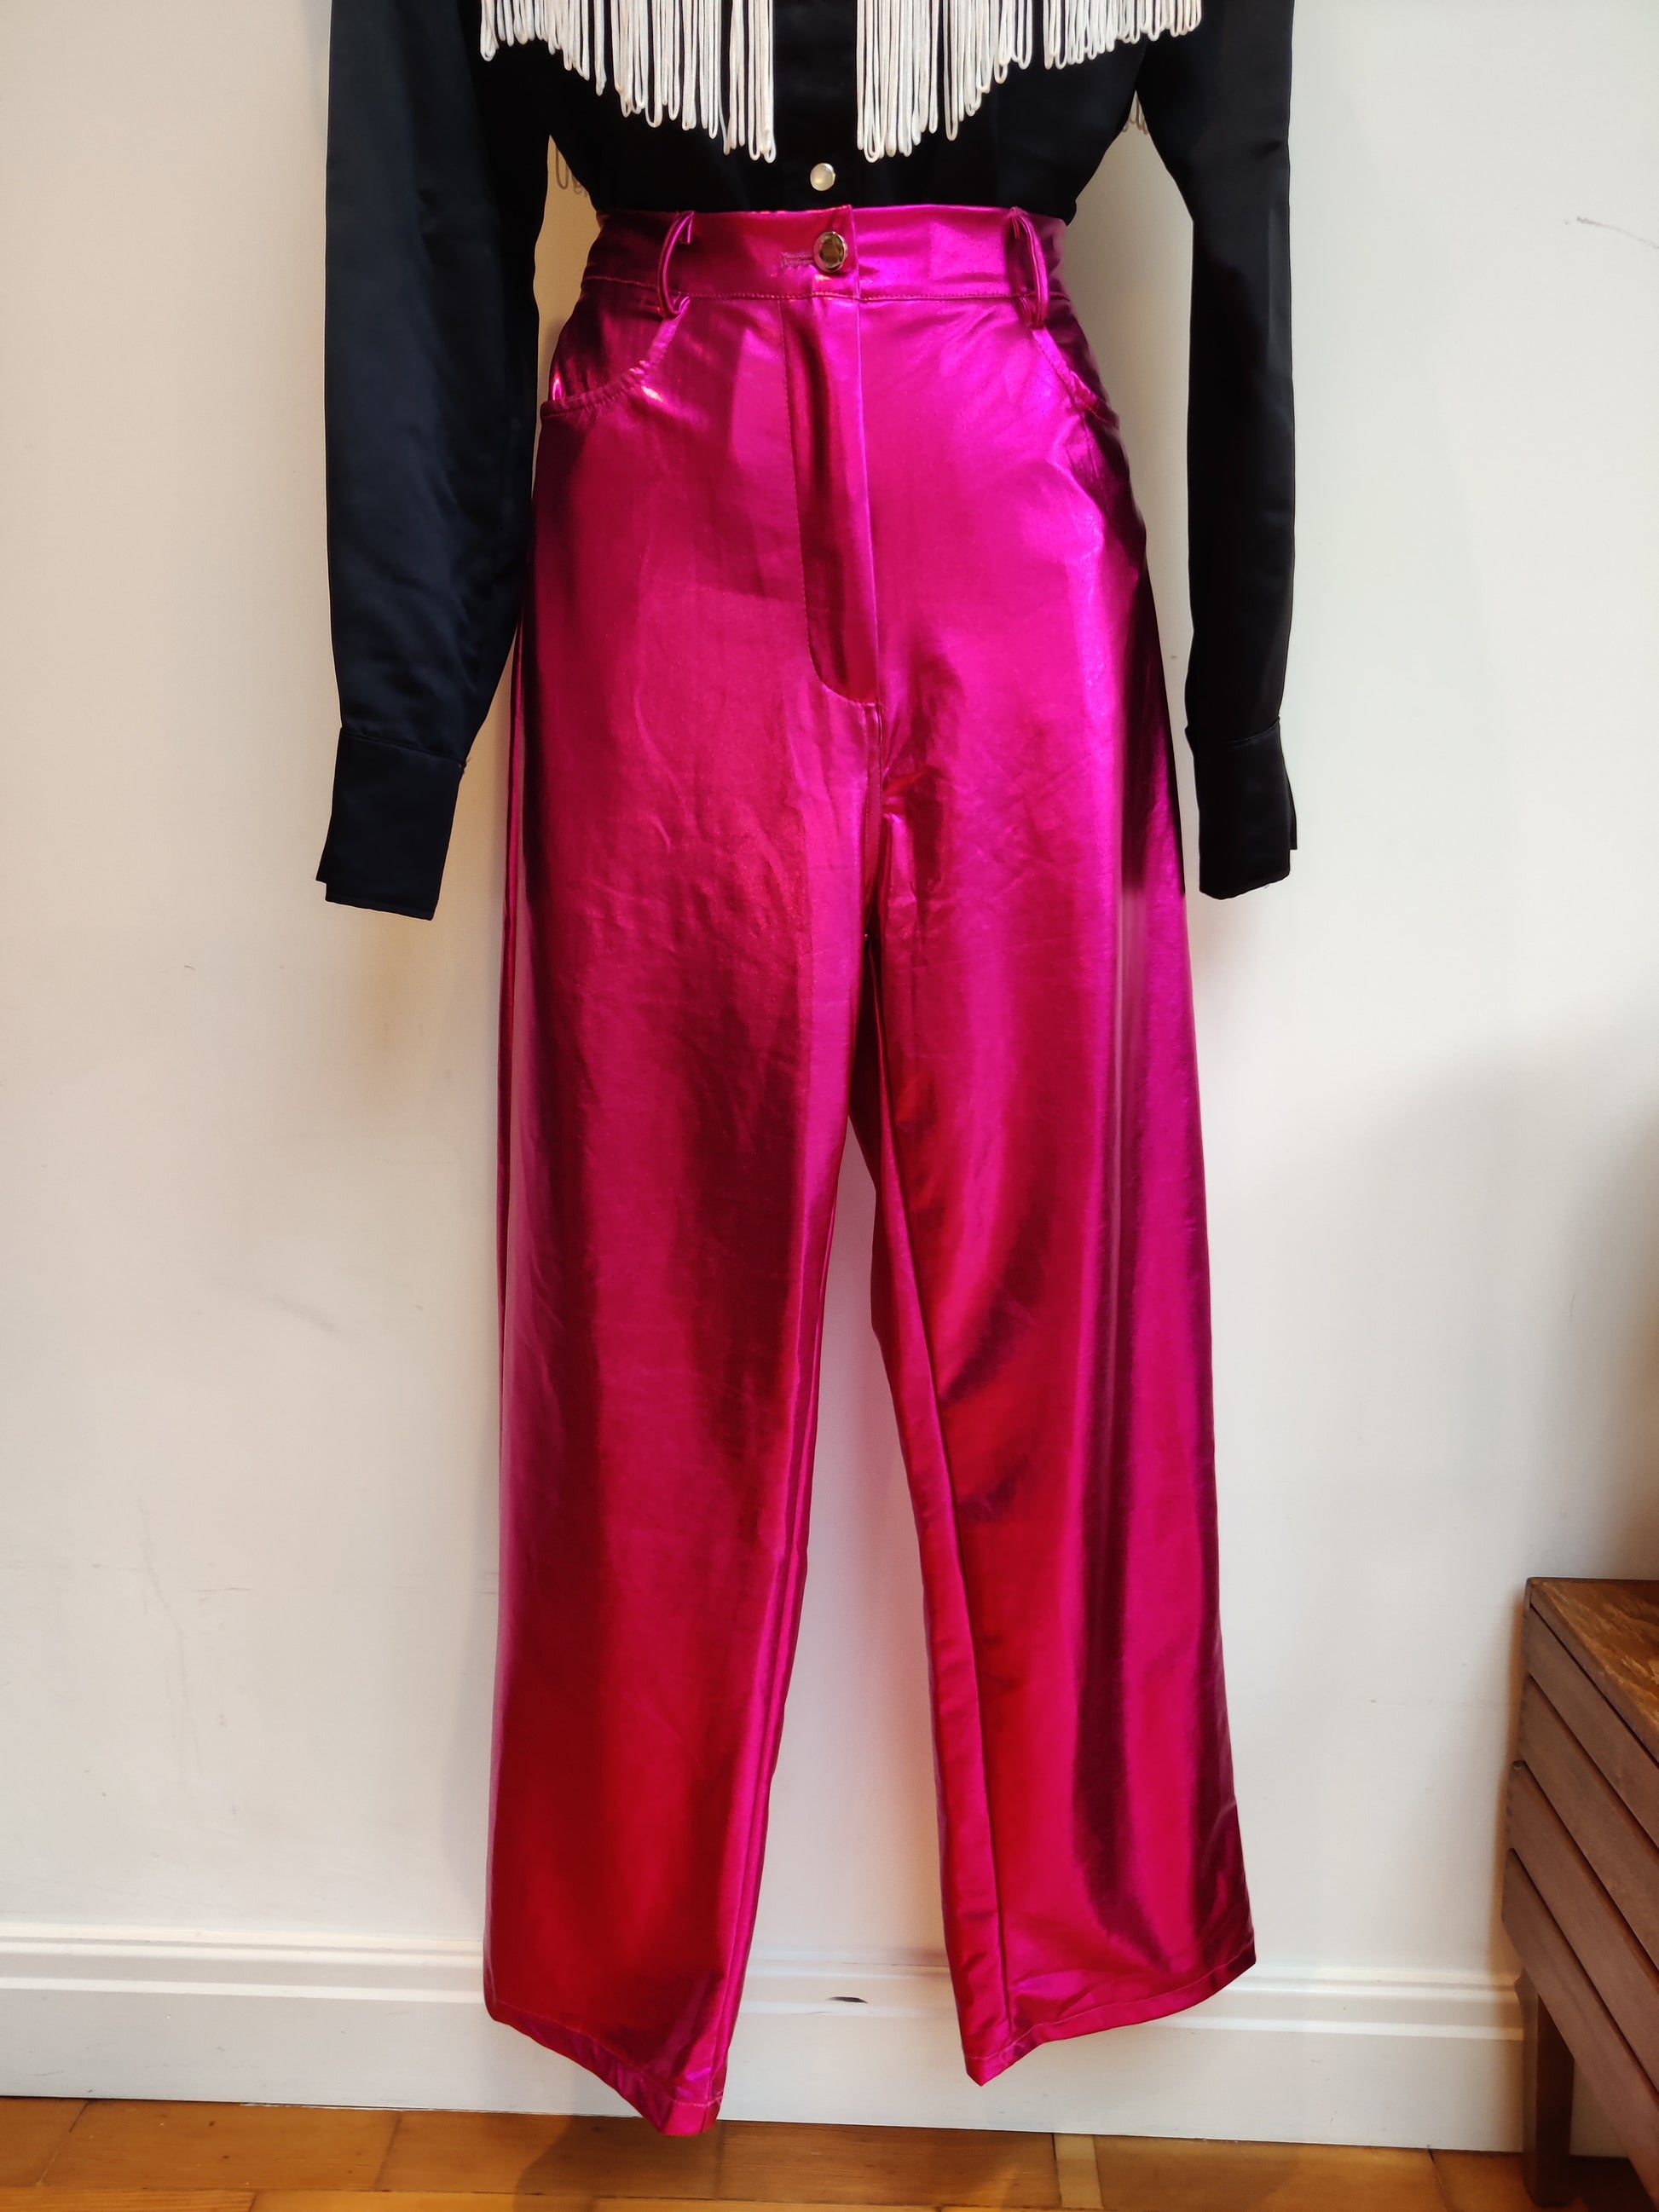 Bright pink 90s trousers